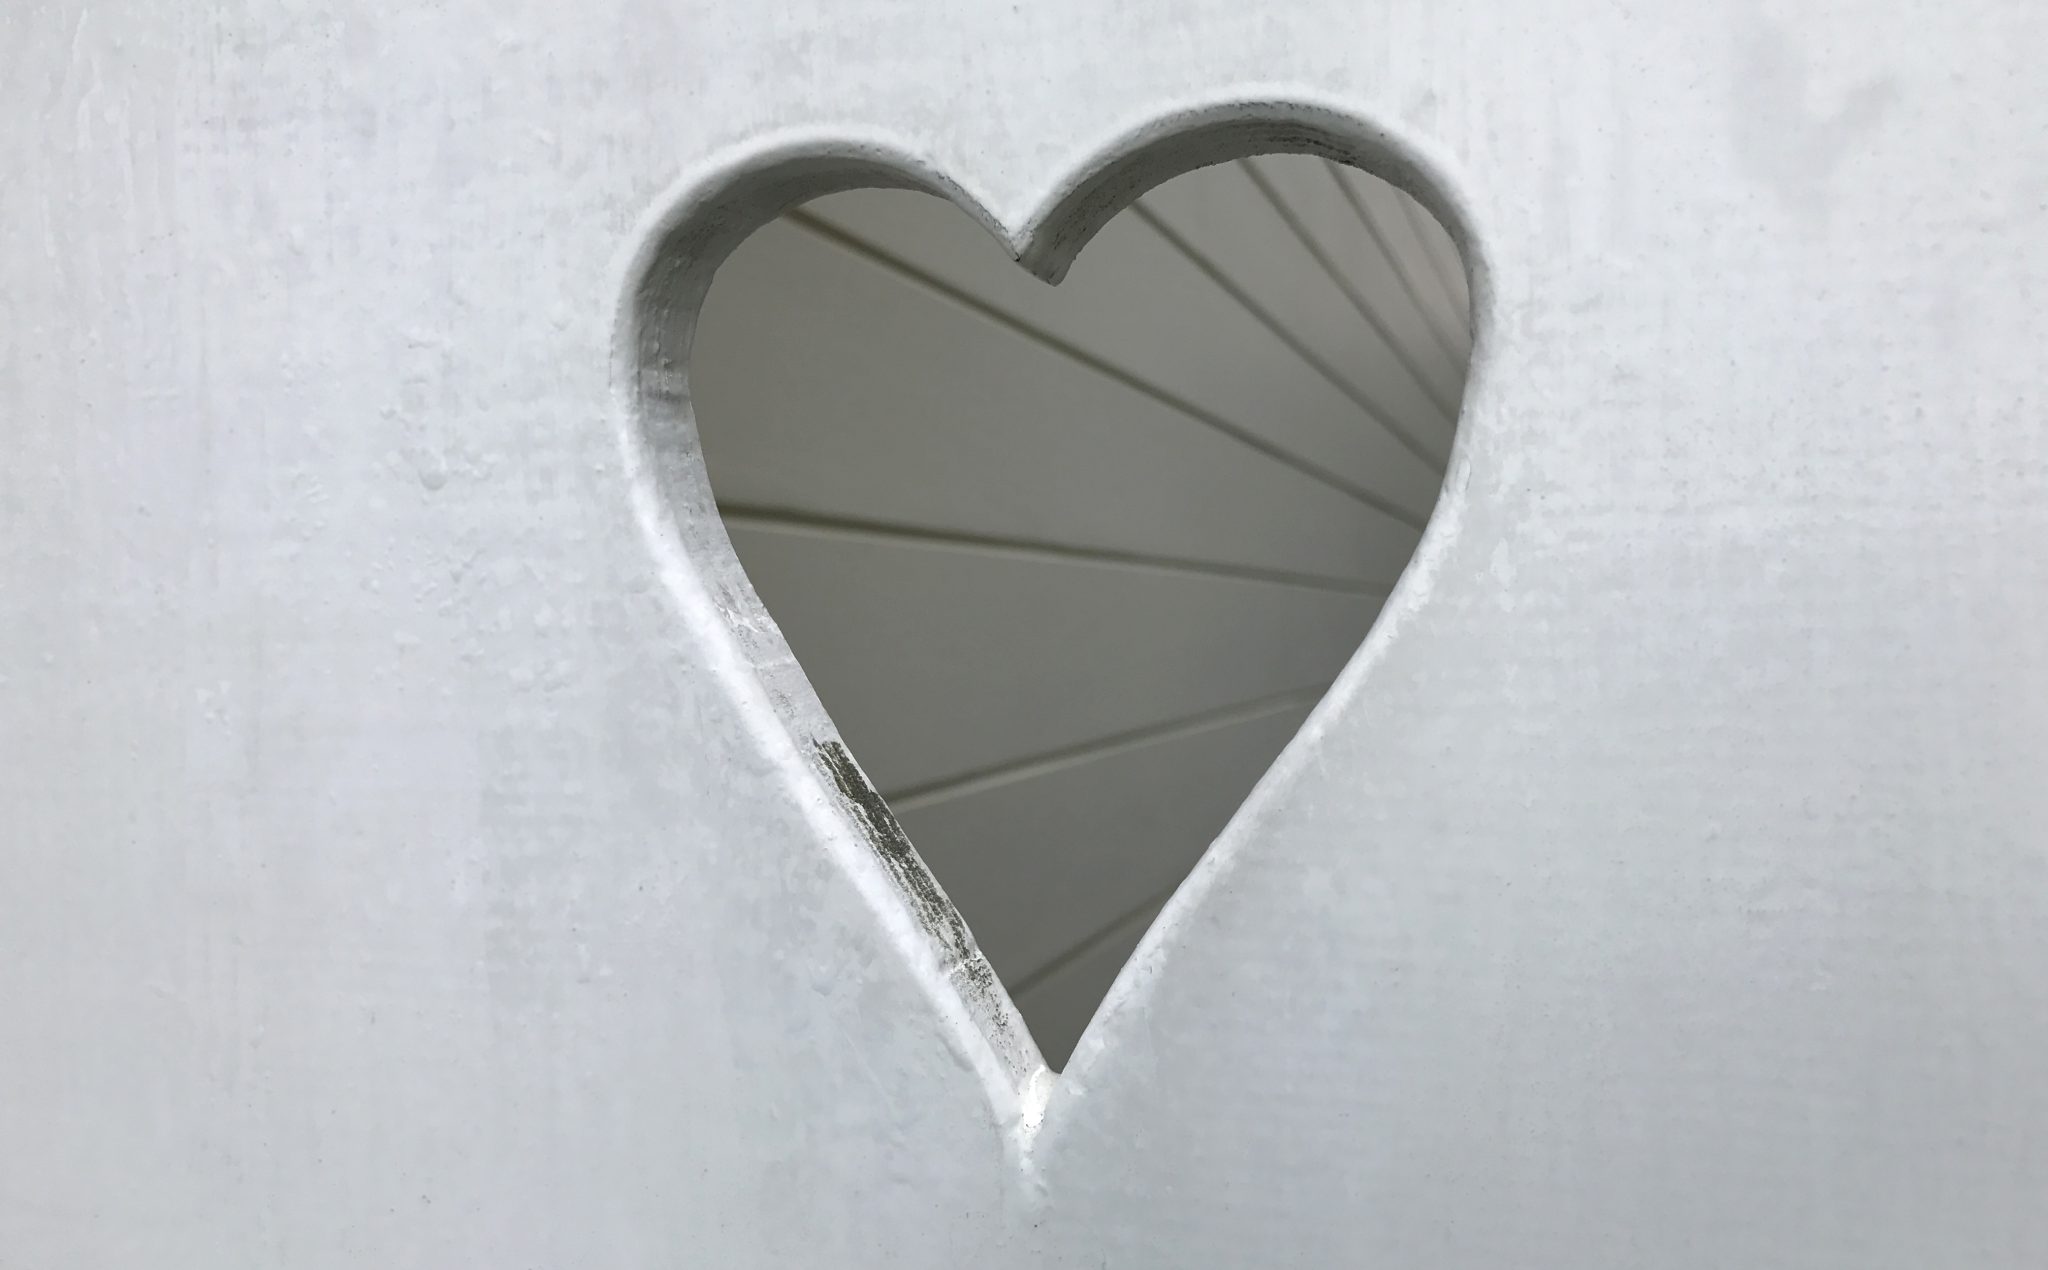 Heart Cut Out Of Wood Painted White